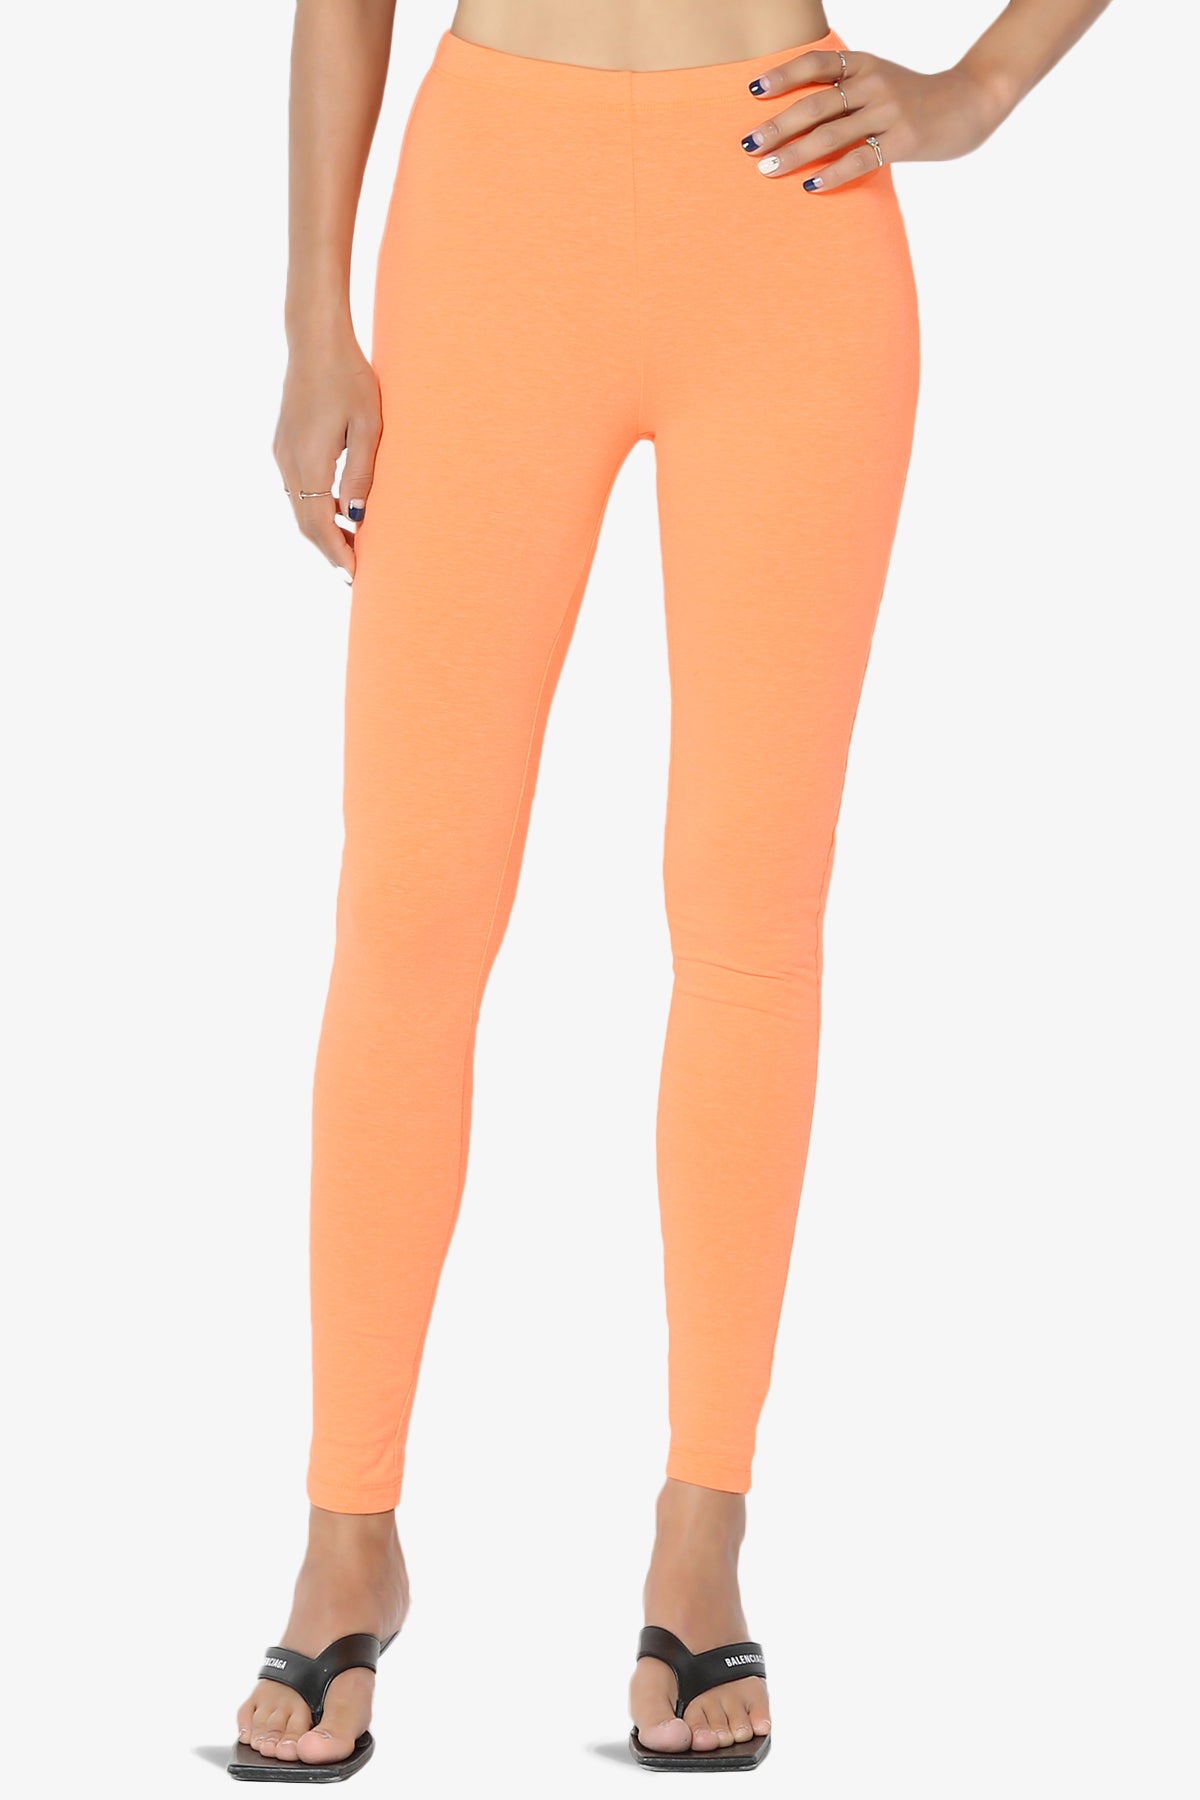 Ansley Luxe Cotton Ankle Leggings MORE COLORS